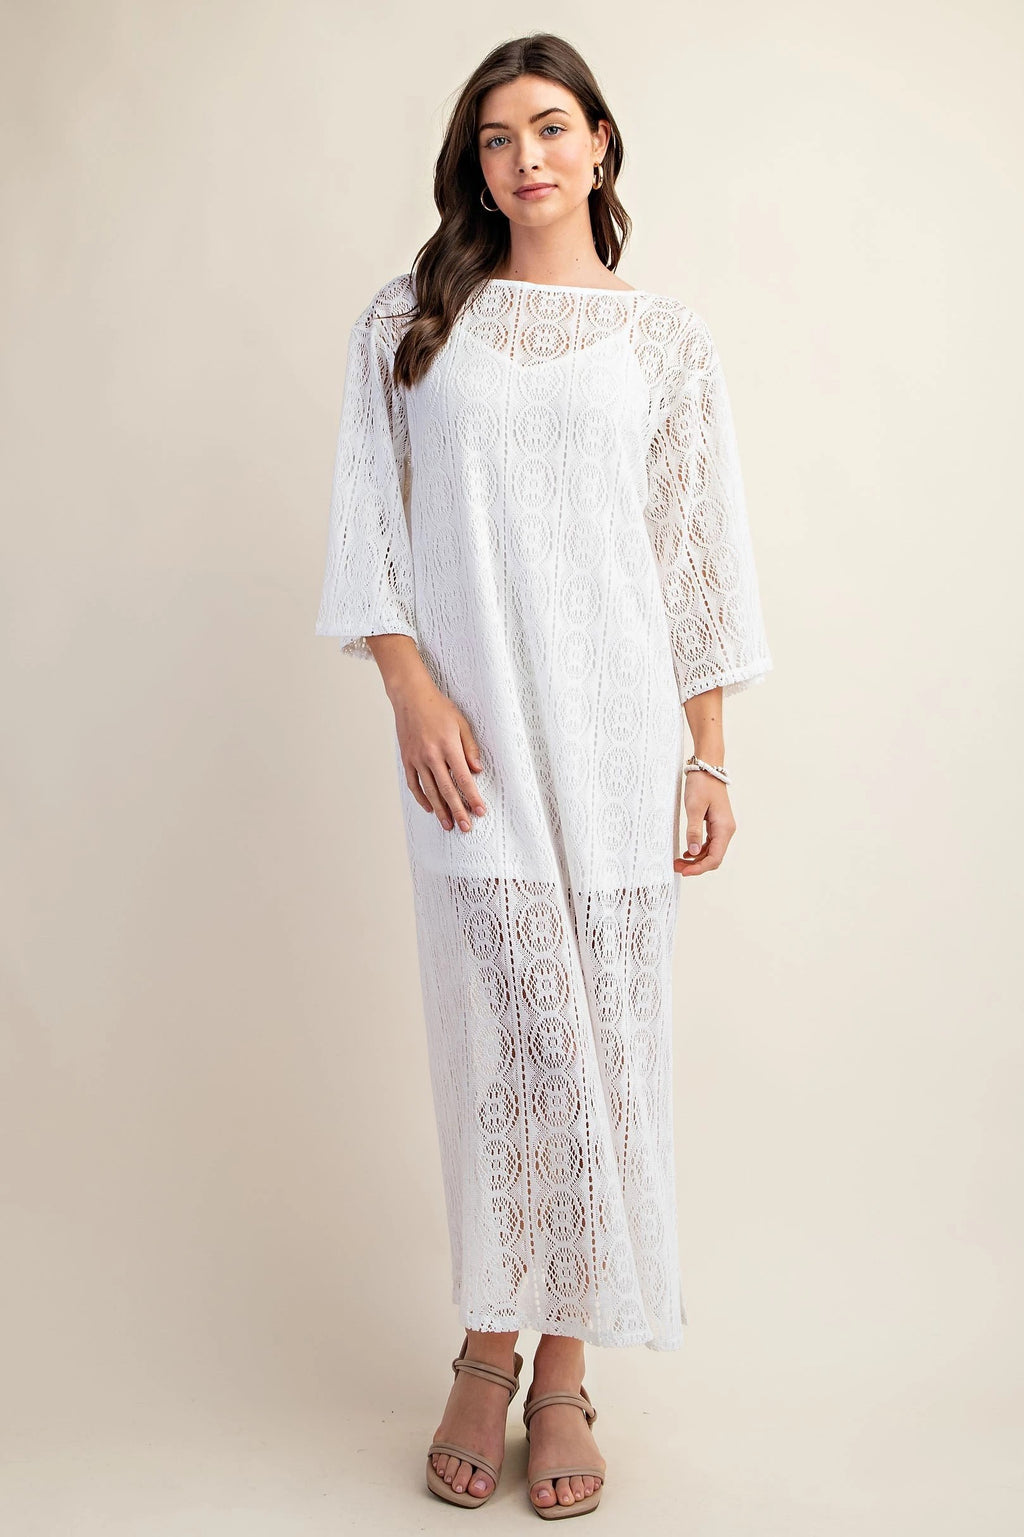 "Whitney" Layered Lace Maxi Dress - The Katie Grace Boutique